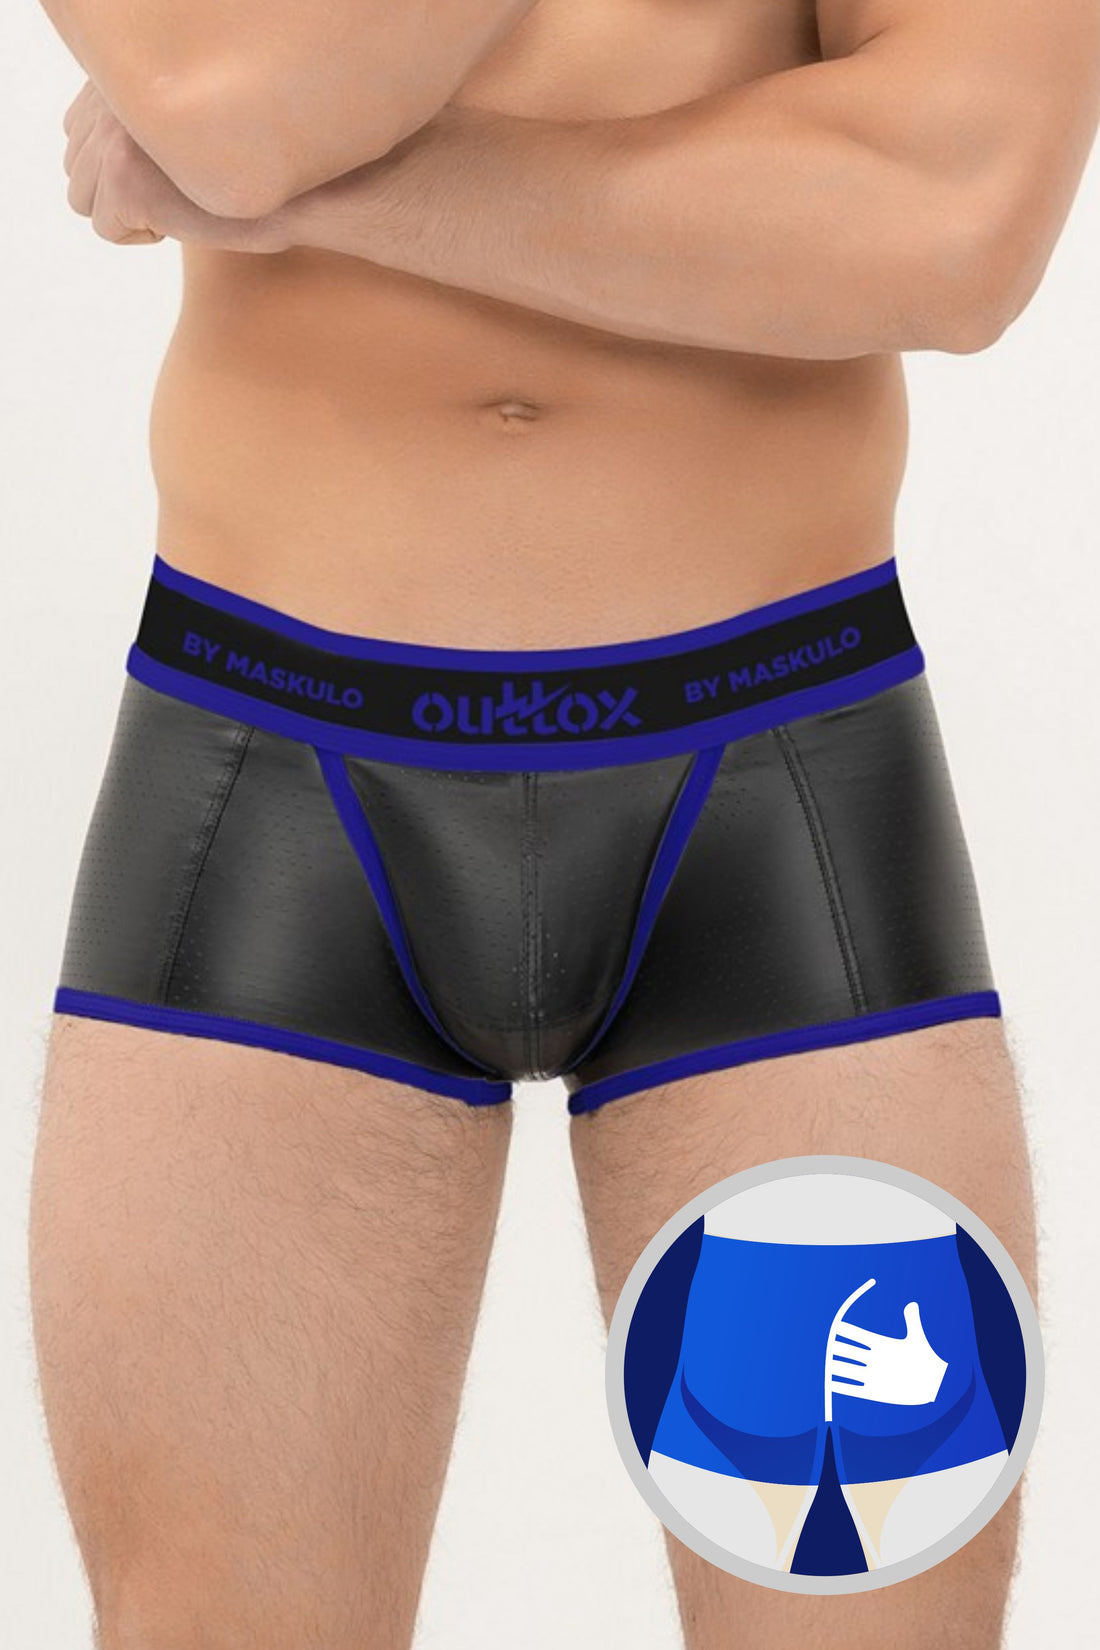 Outtox. Wrapped Rear Trunk Shorts with Snap Codpiece. Blue